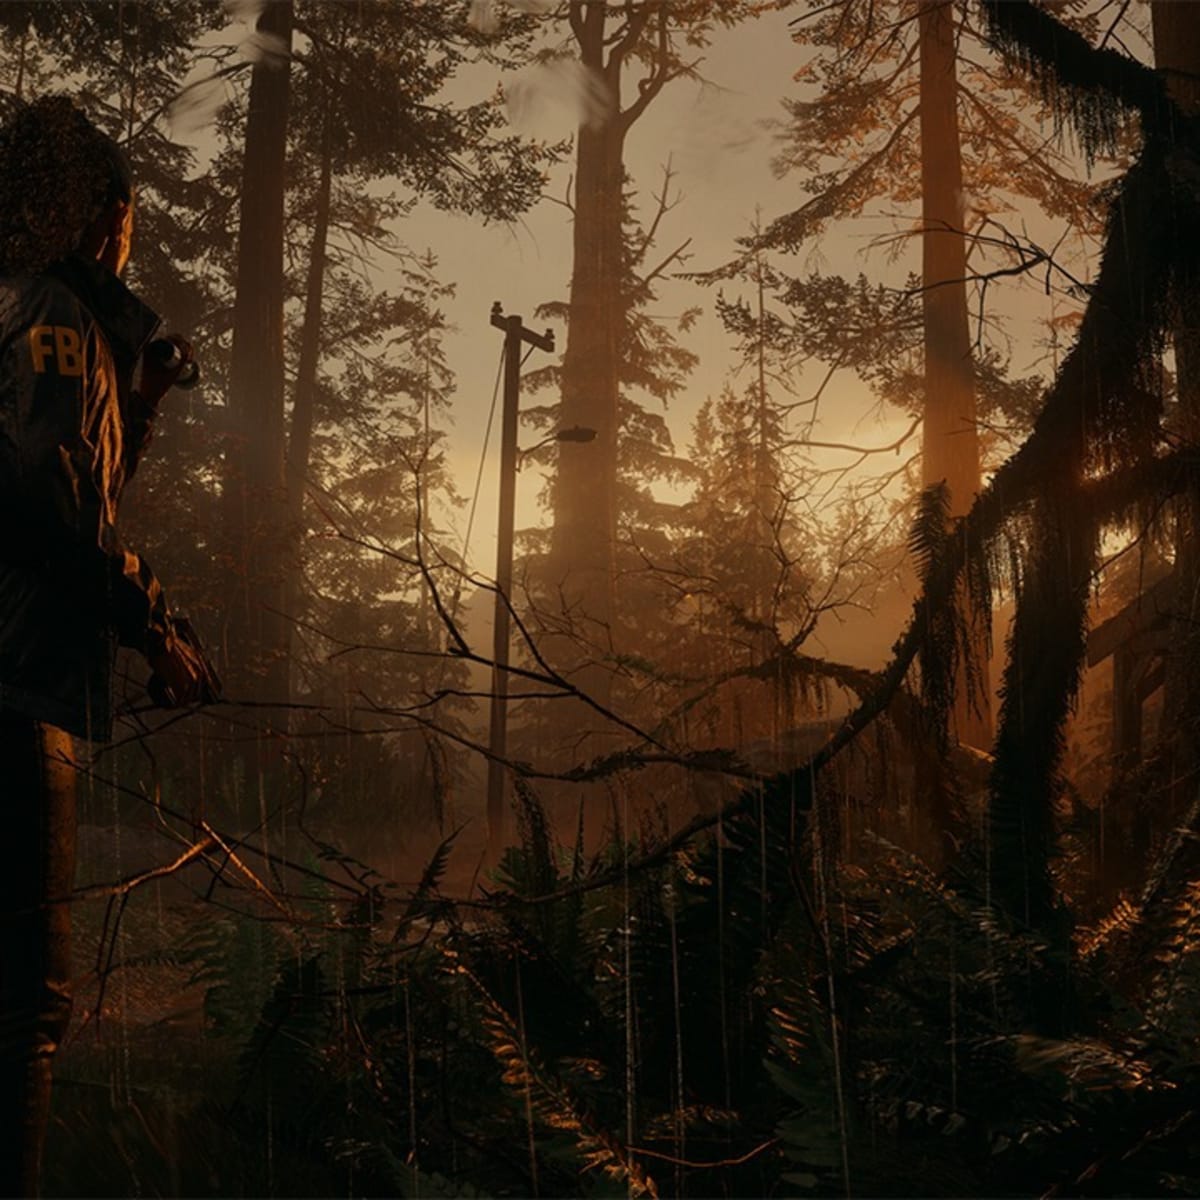 Alan Wake 2 PC Requirements are Immense, Leaving Many to Miss the